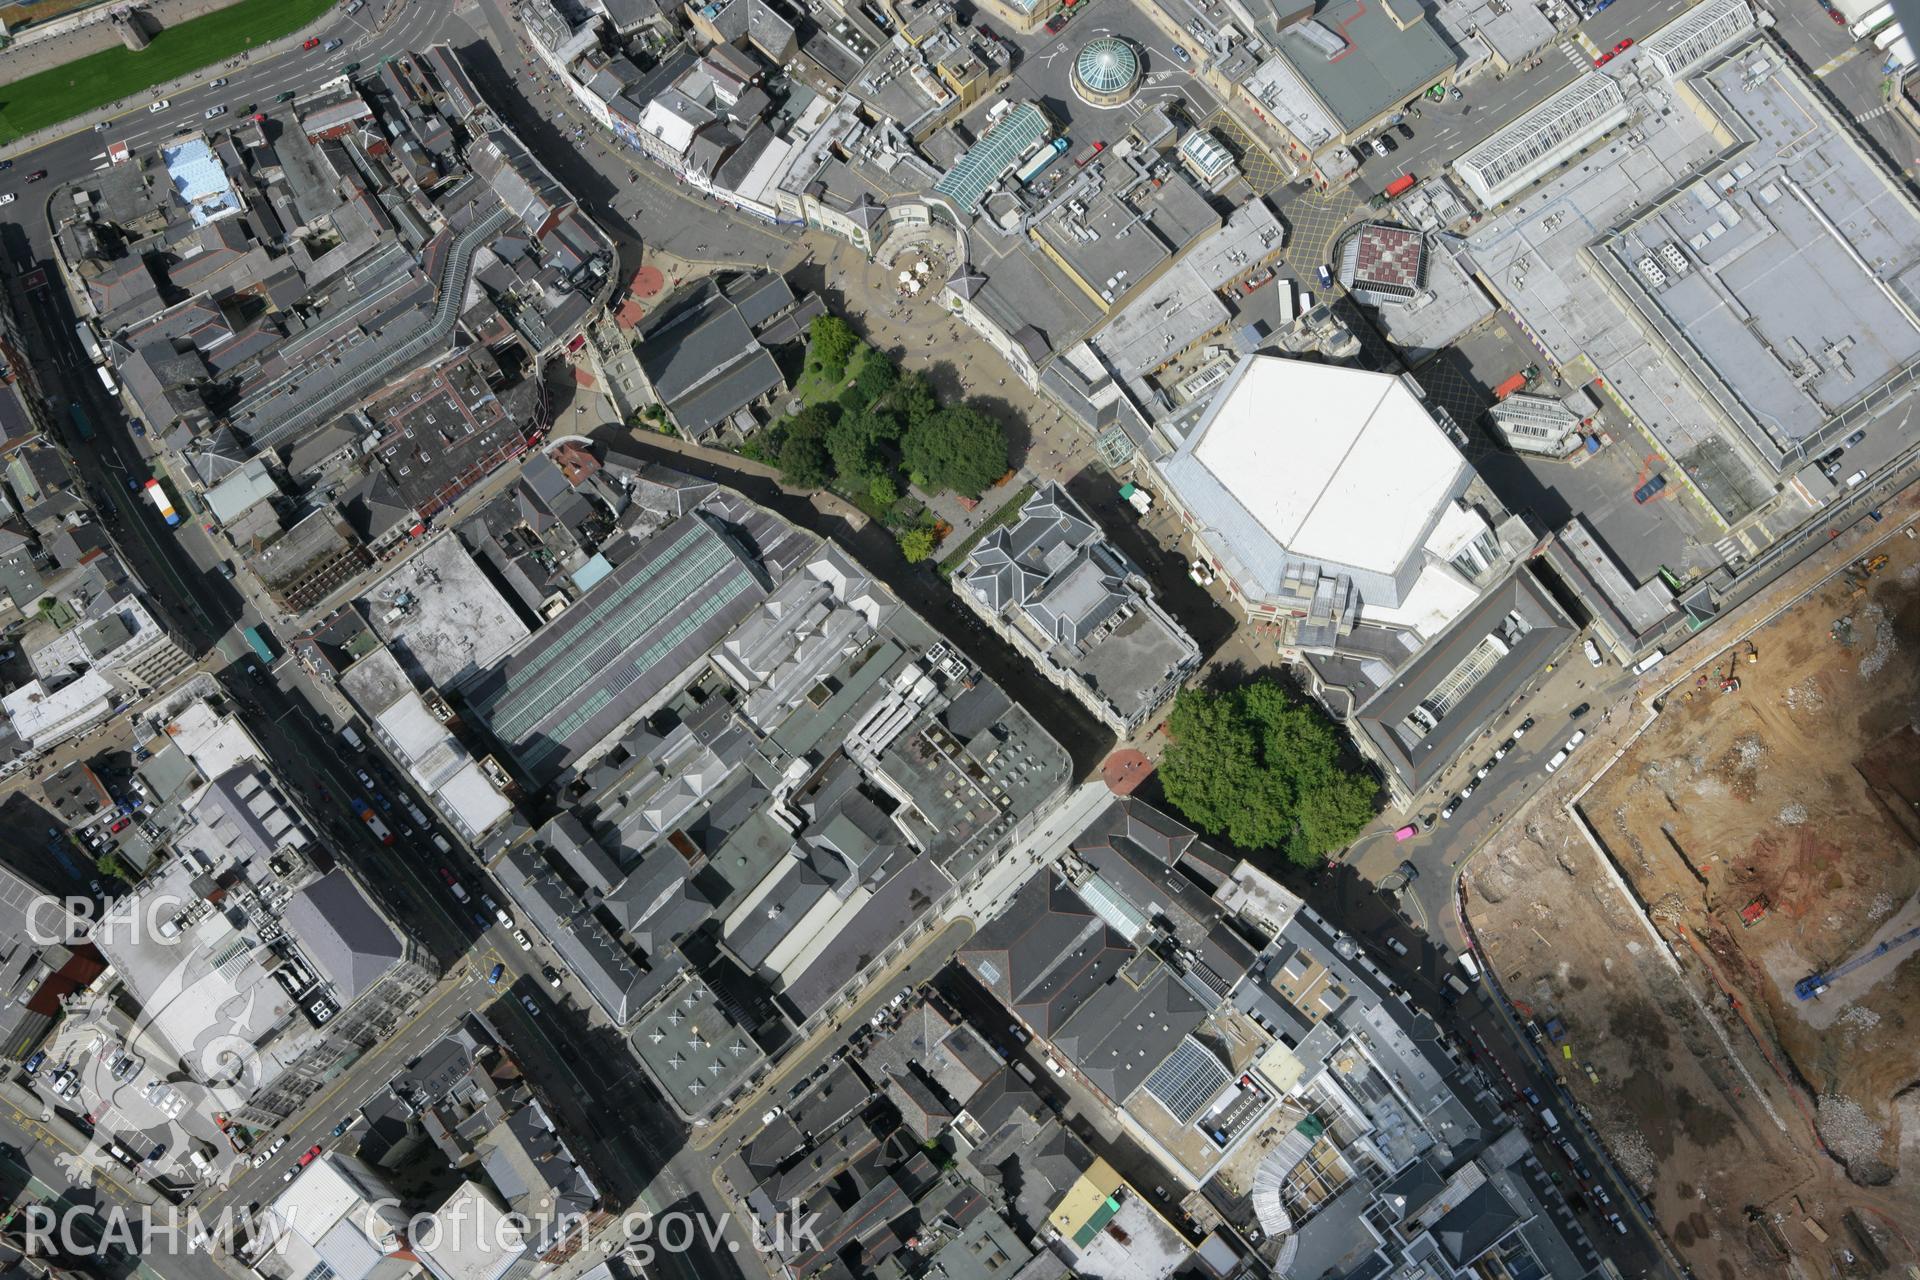 RCAHMW colour oblique aerial photograph of Cardiff. Taken on 30 July 2007 by Toby Driver